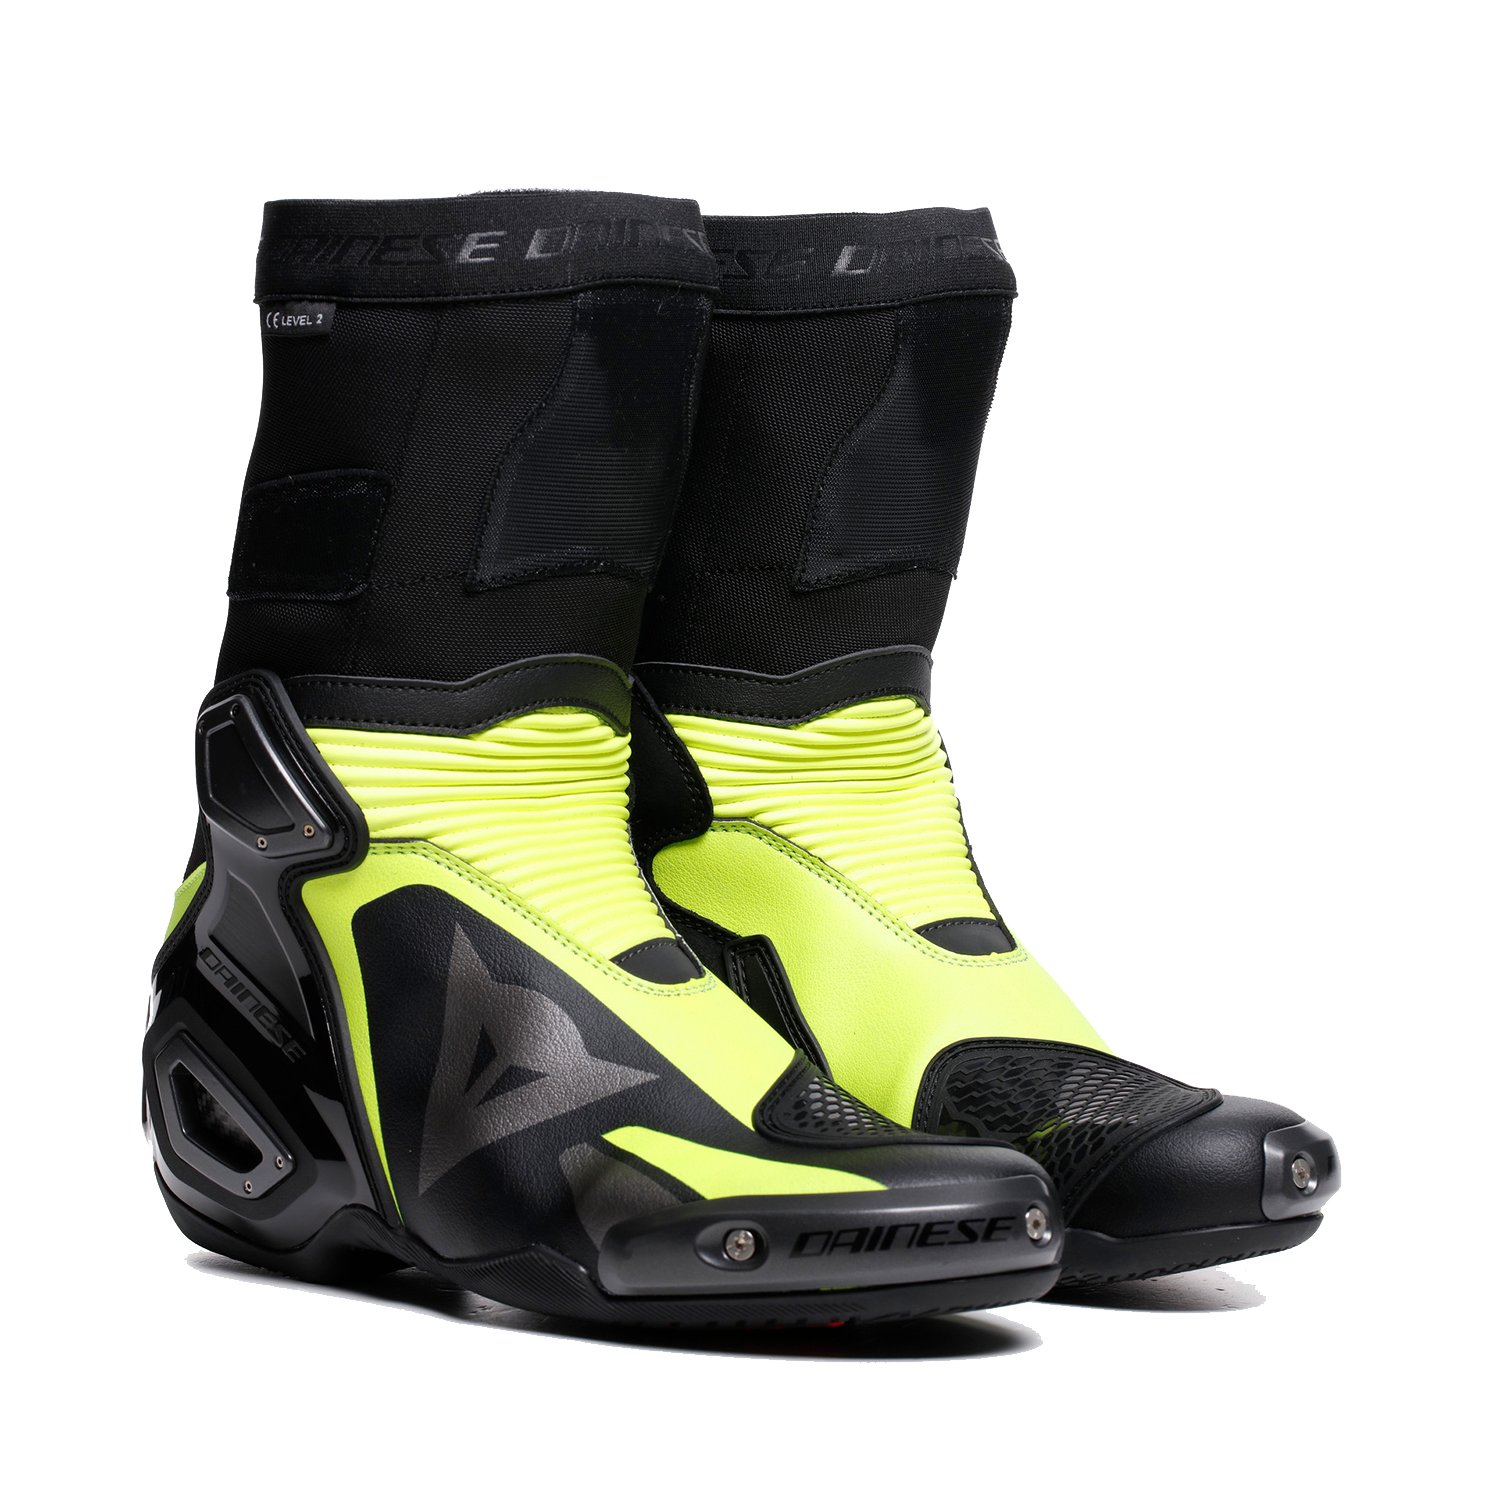 Image of Dainese Axial 2 Boots Black Yellow Fluo Größe 46